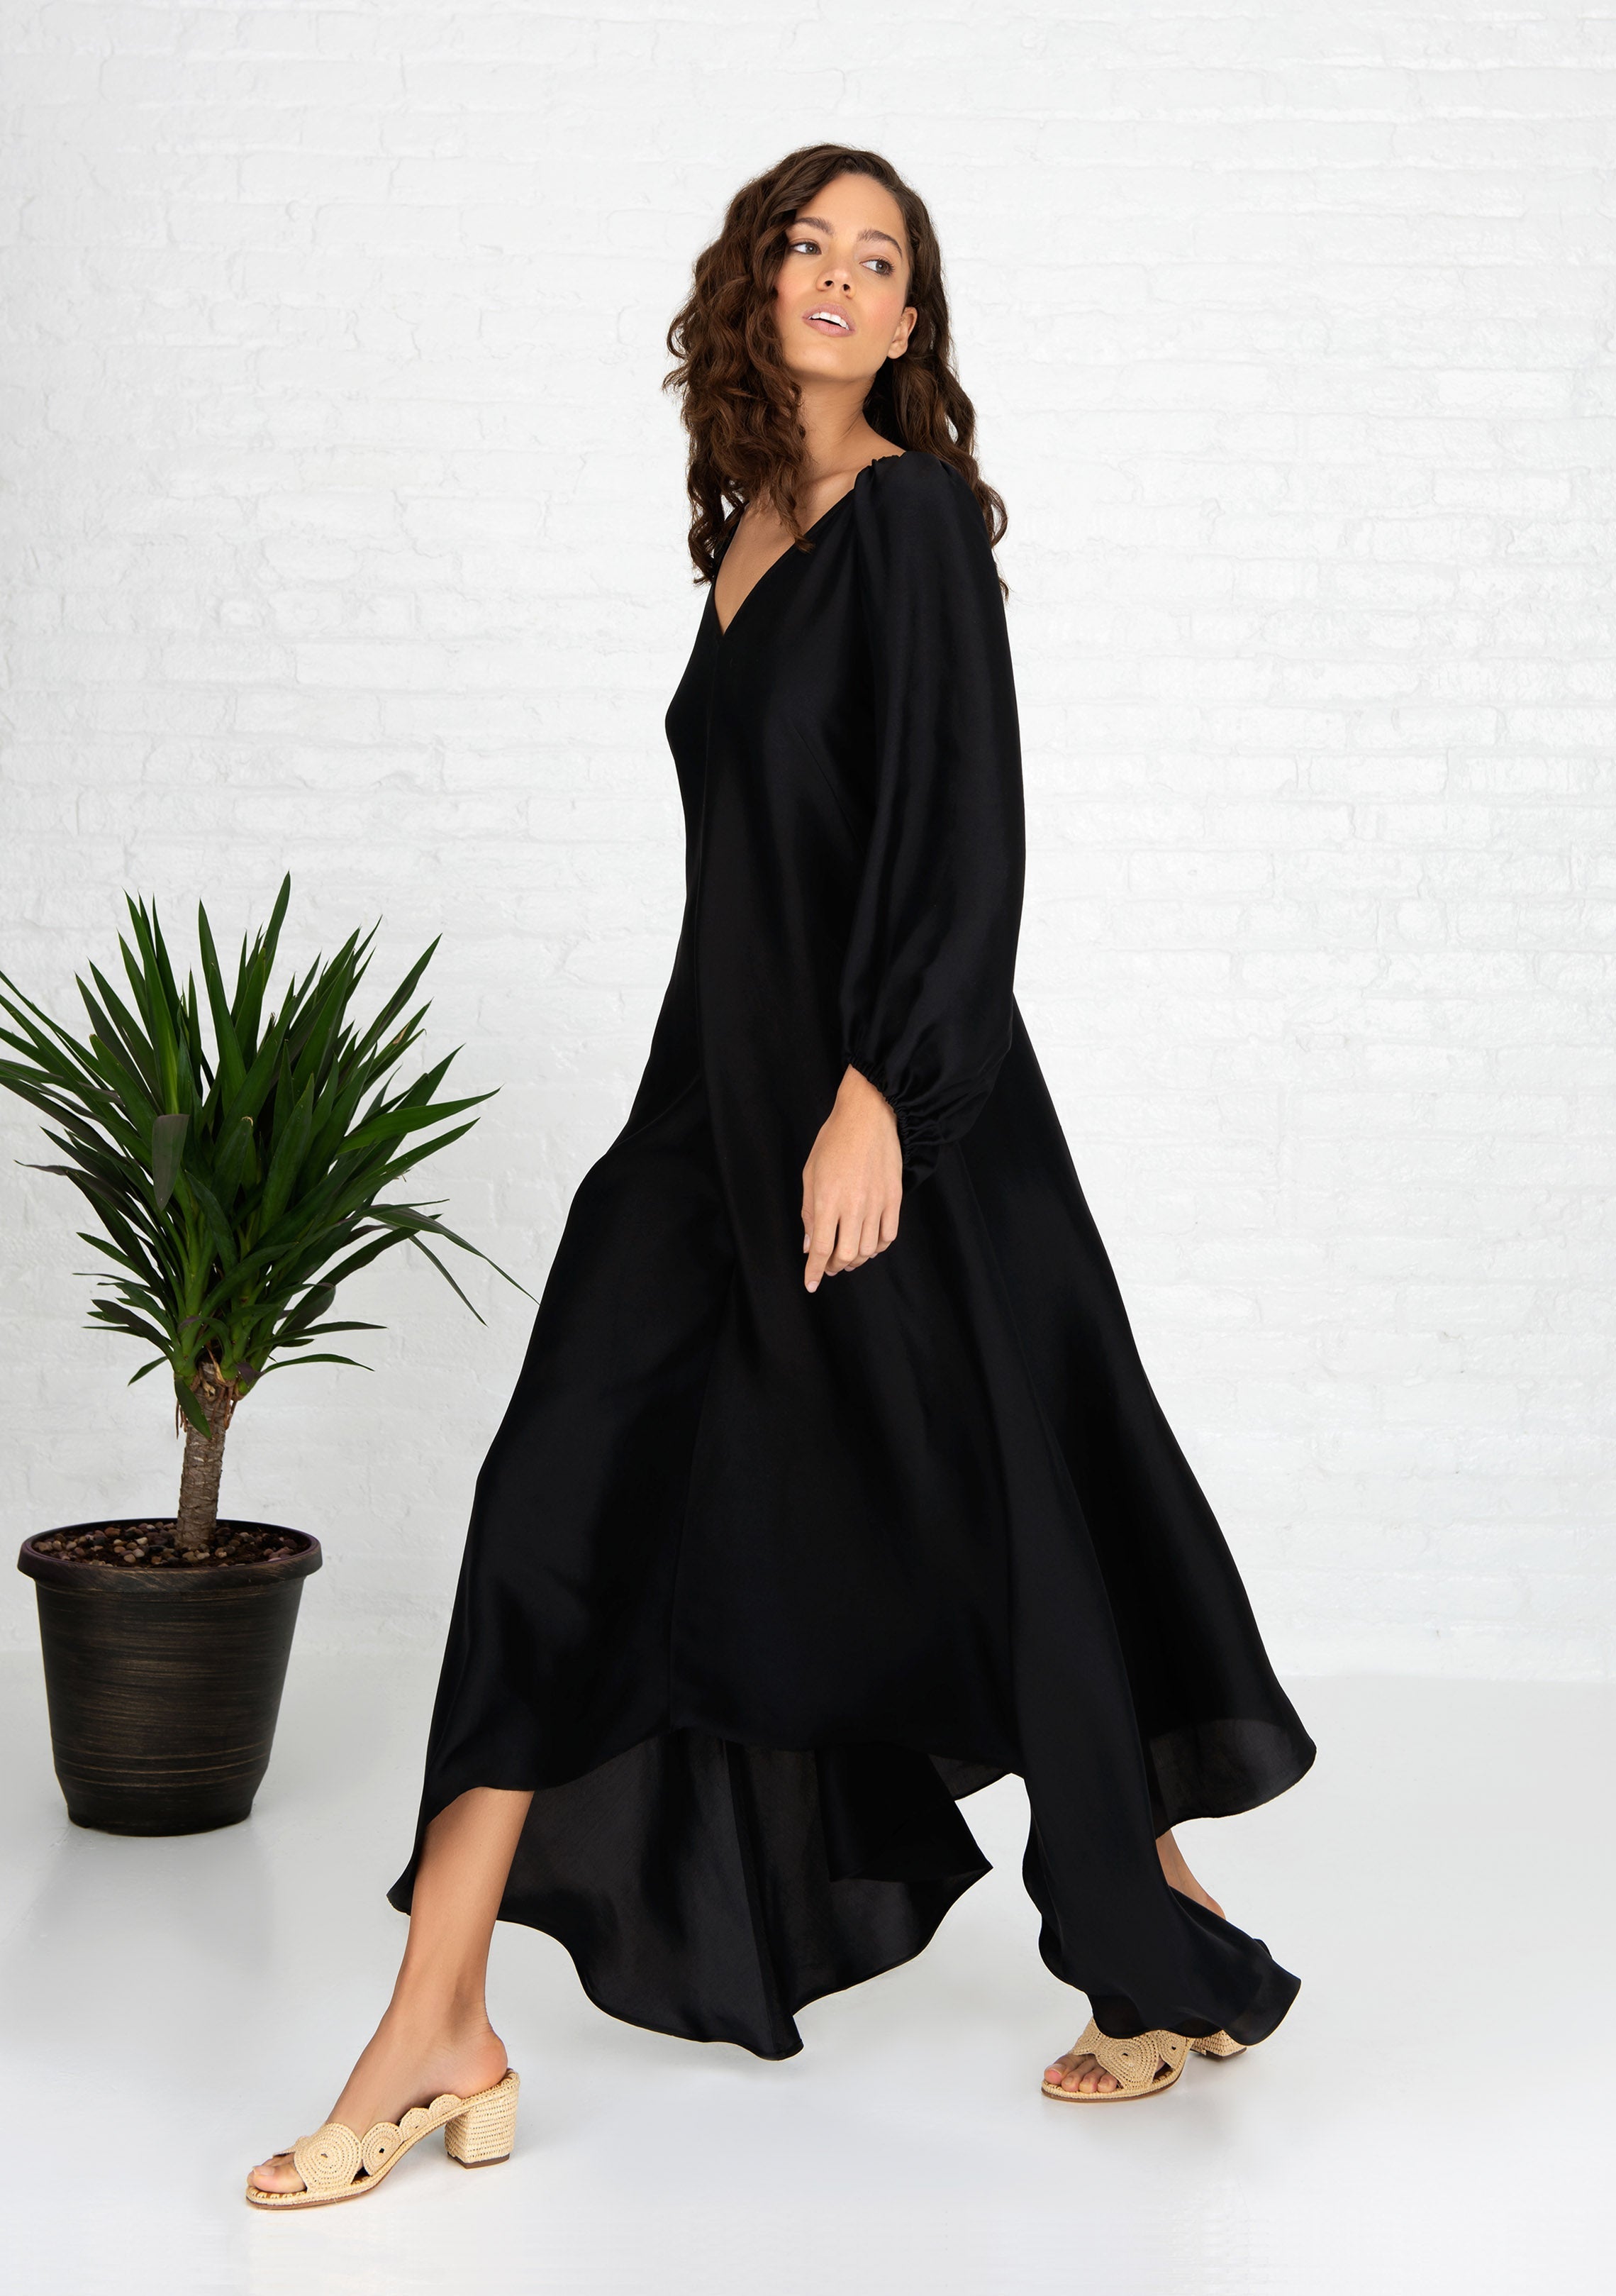 woman standing wearing black puff sleeve silk dress front and back v neck with heels